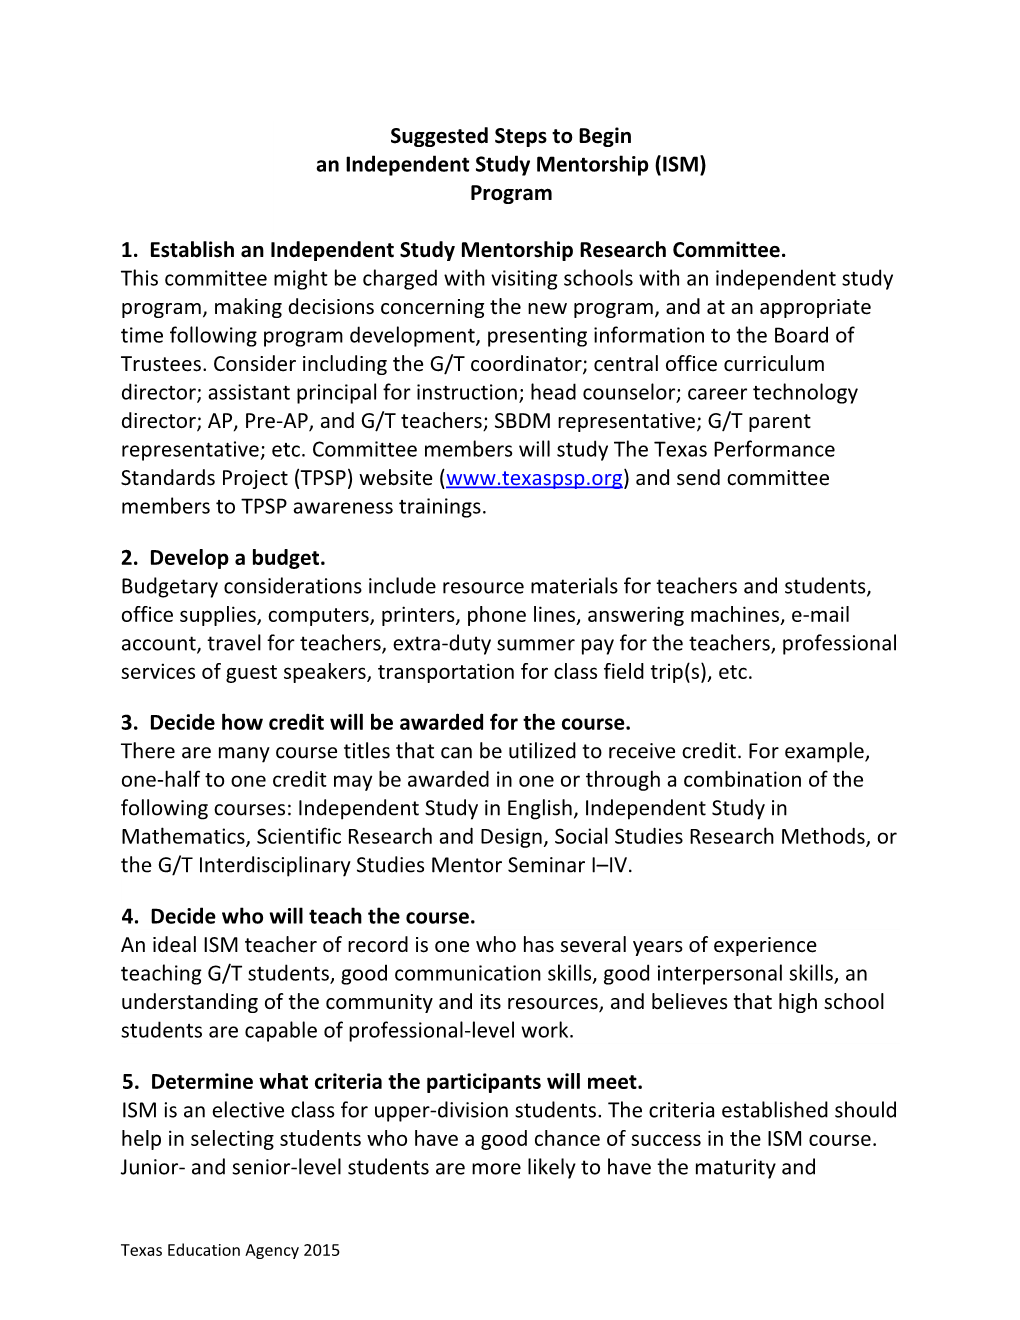 Suggested Steps to Begin an Independent Study Mentorship (ISM) Program